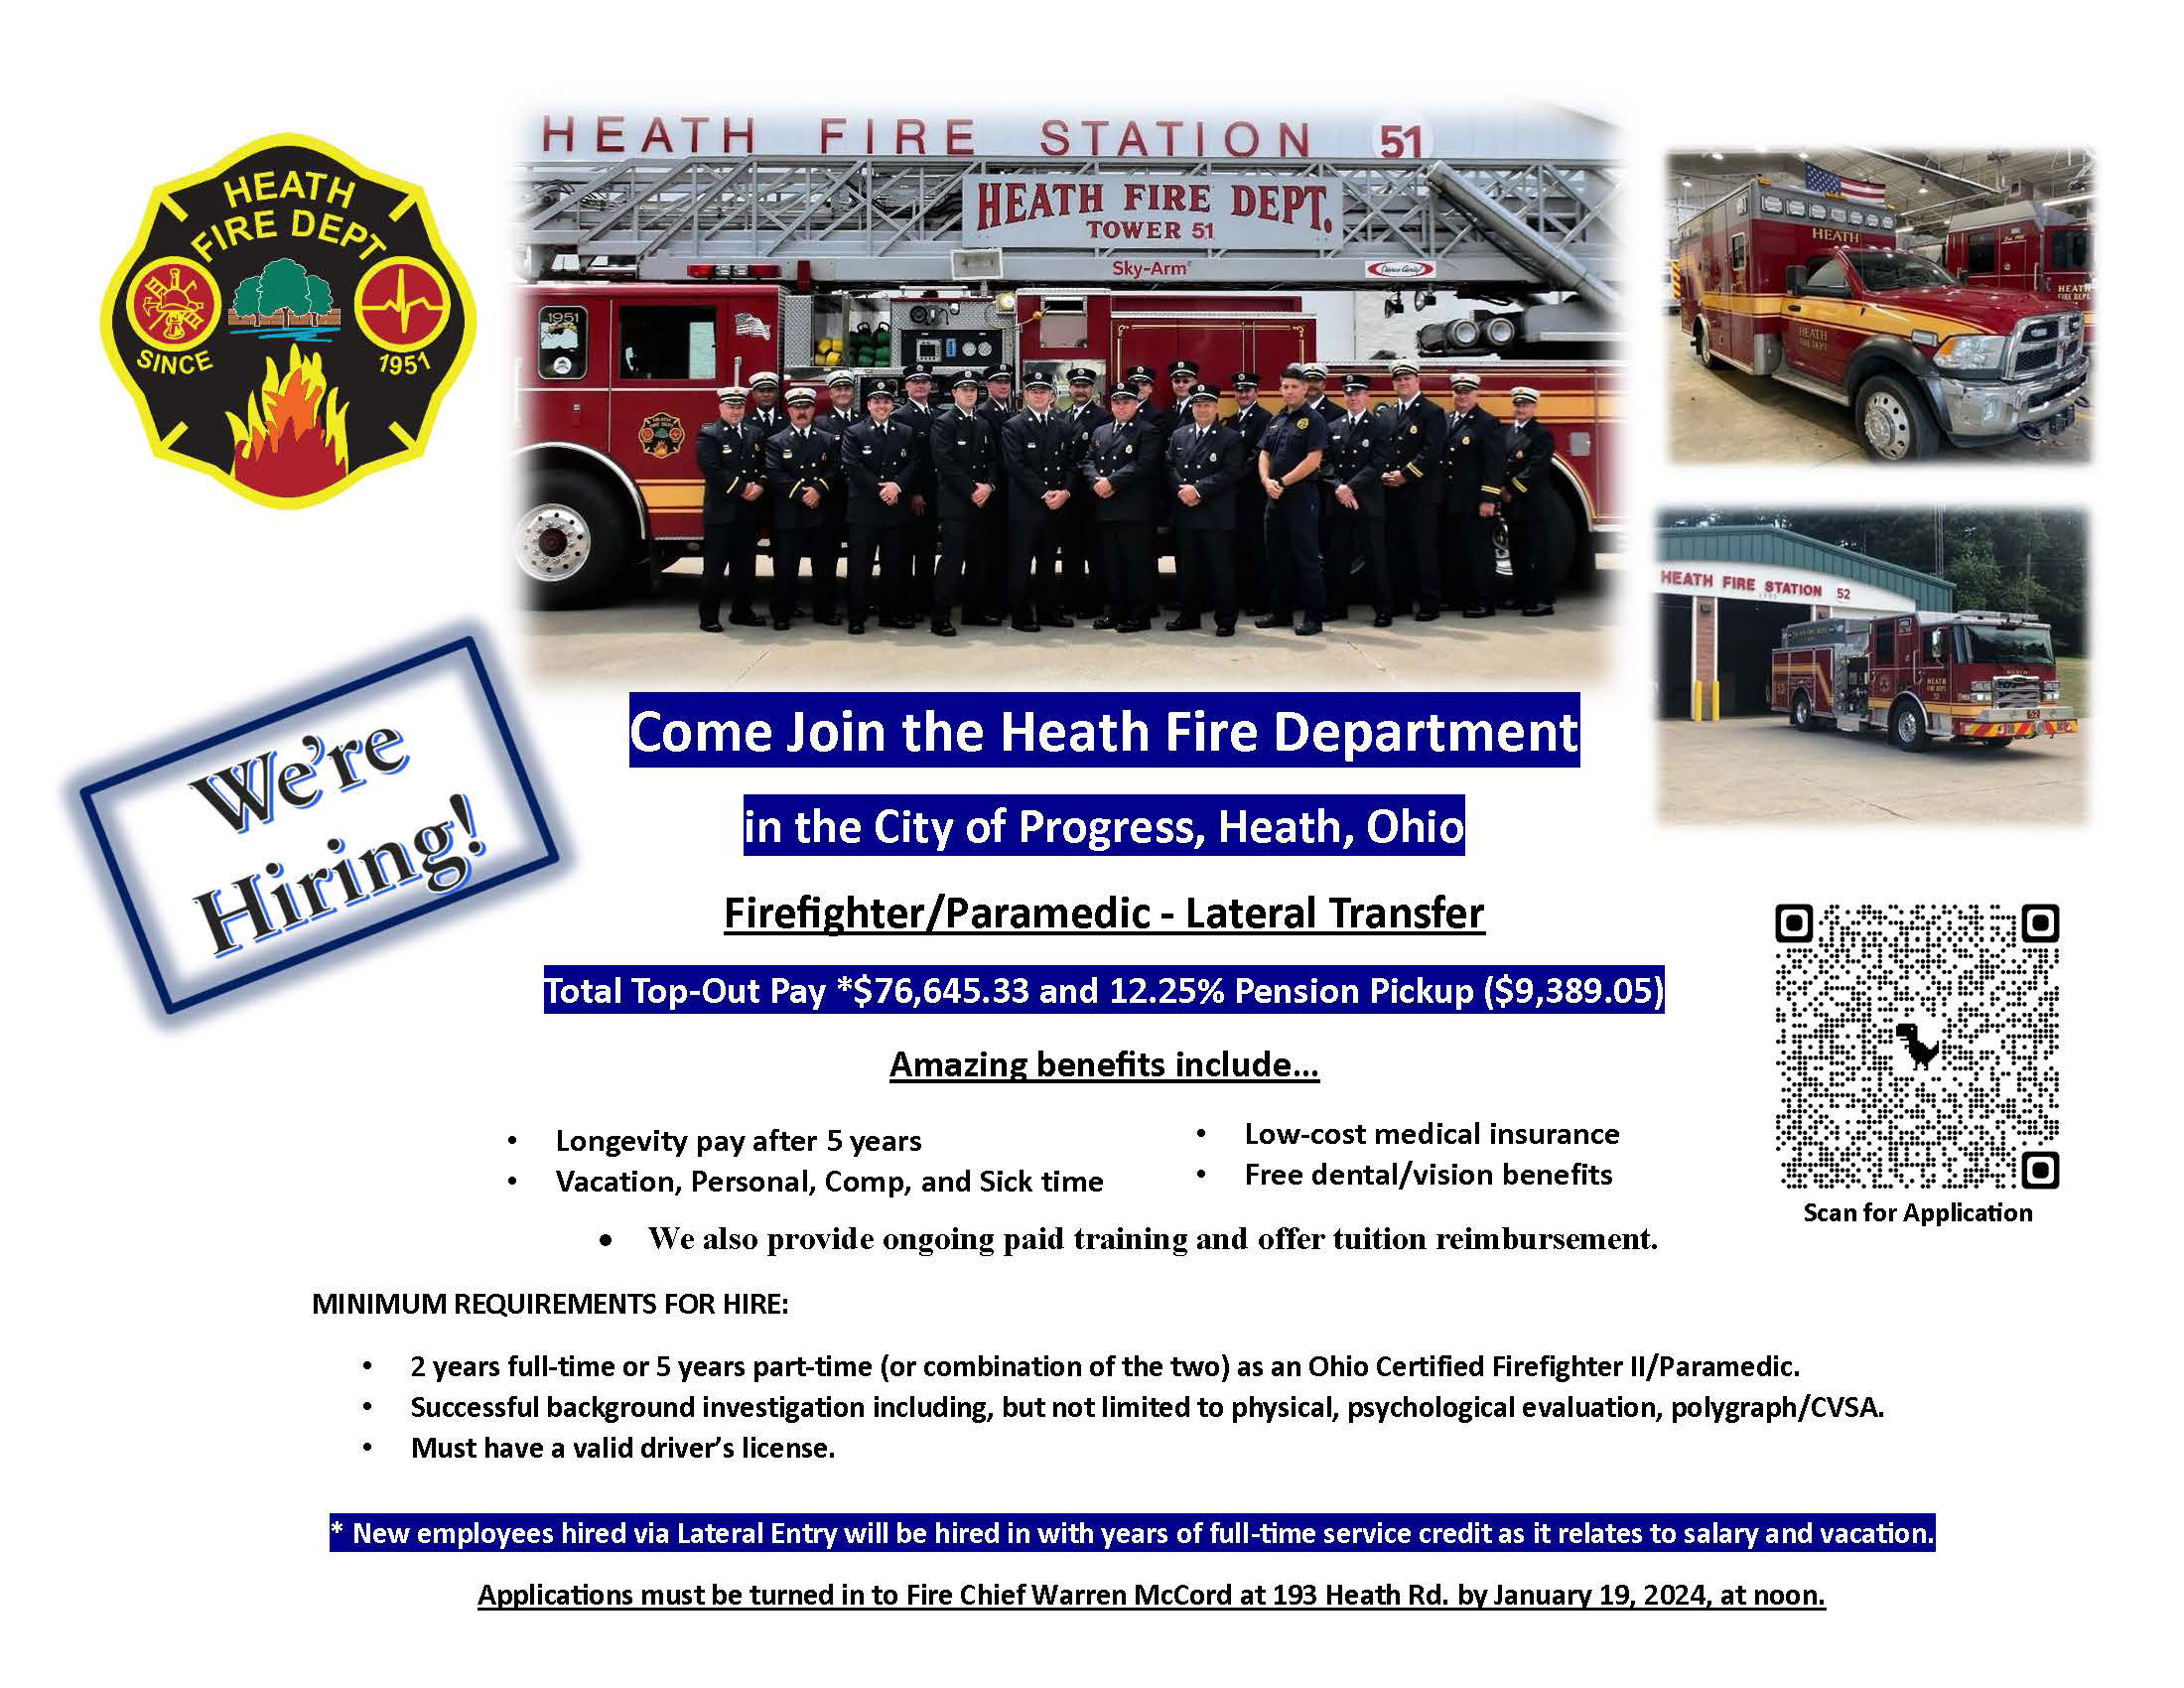 Heath Fire Department Firefighter Paramedic Lateral Transfer